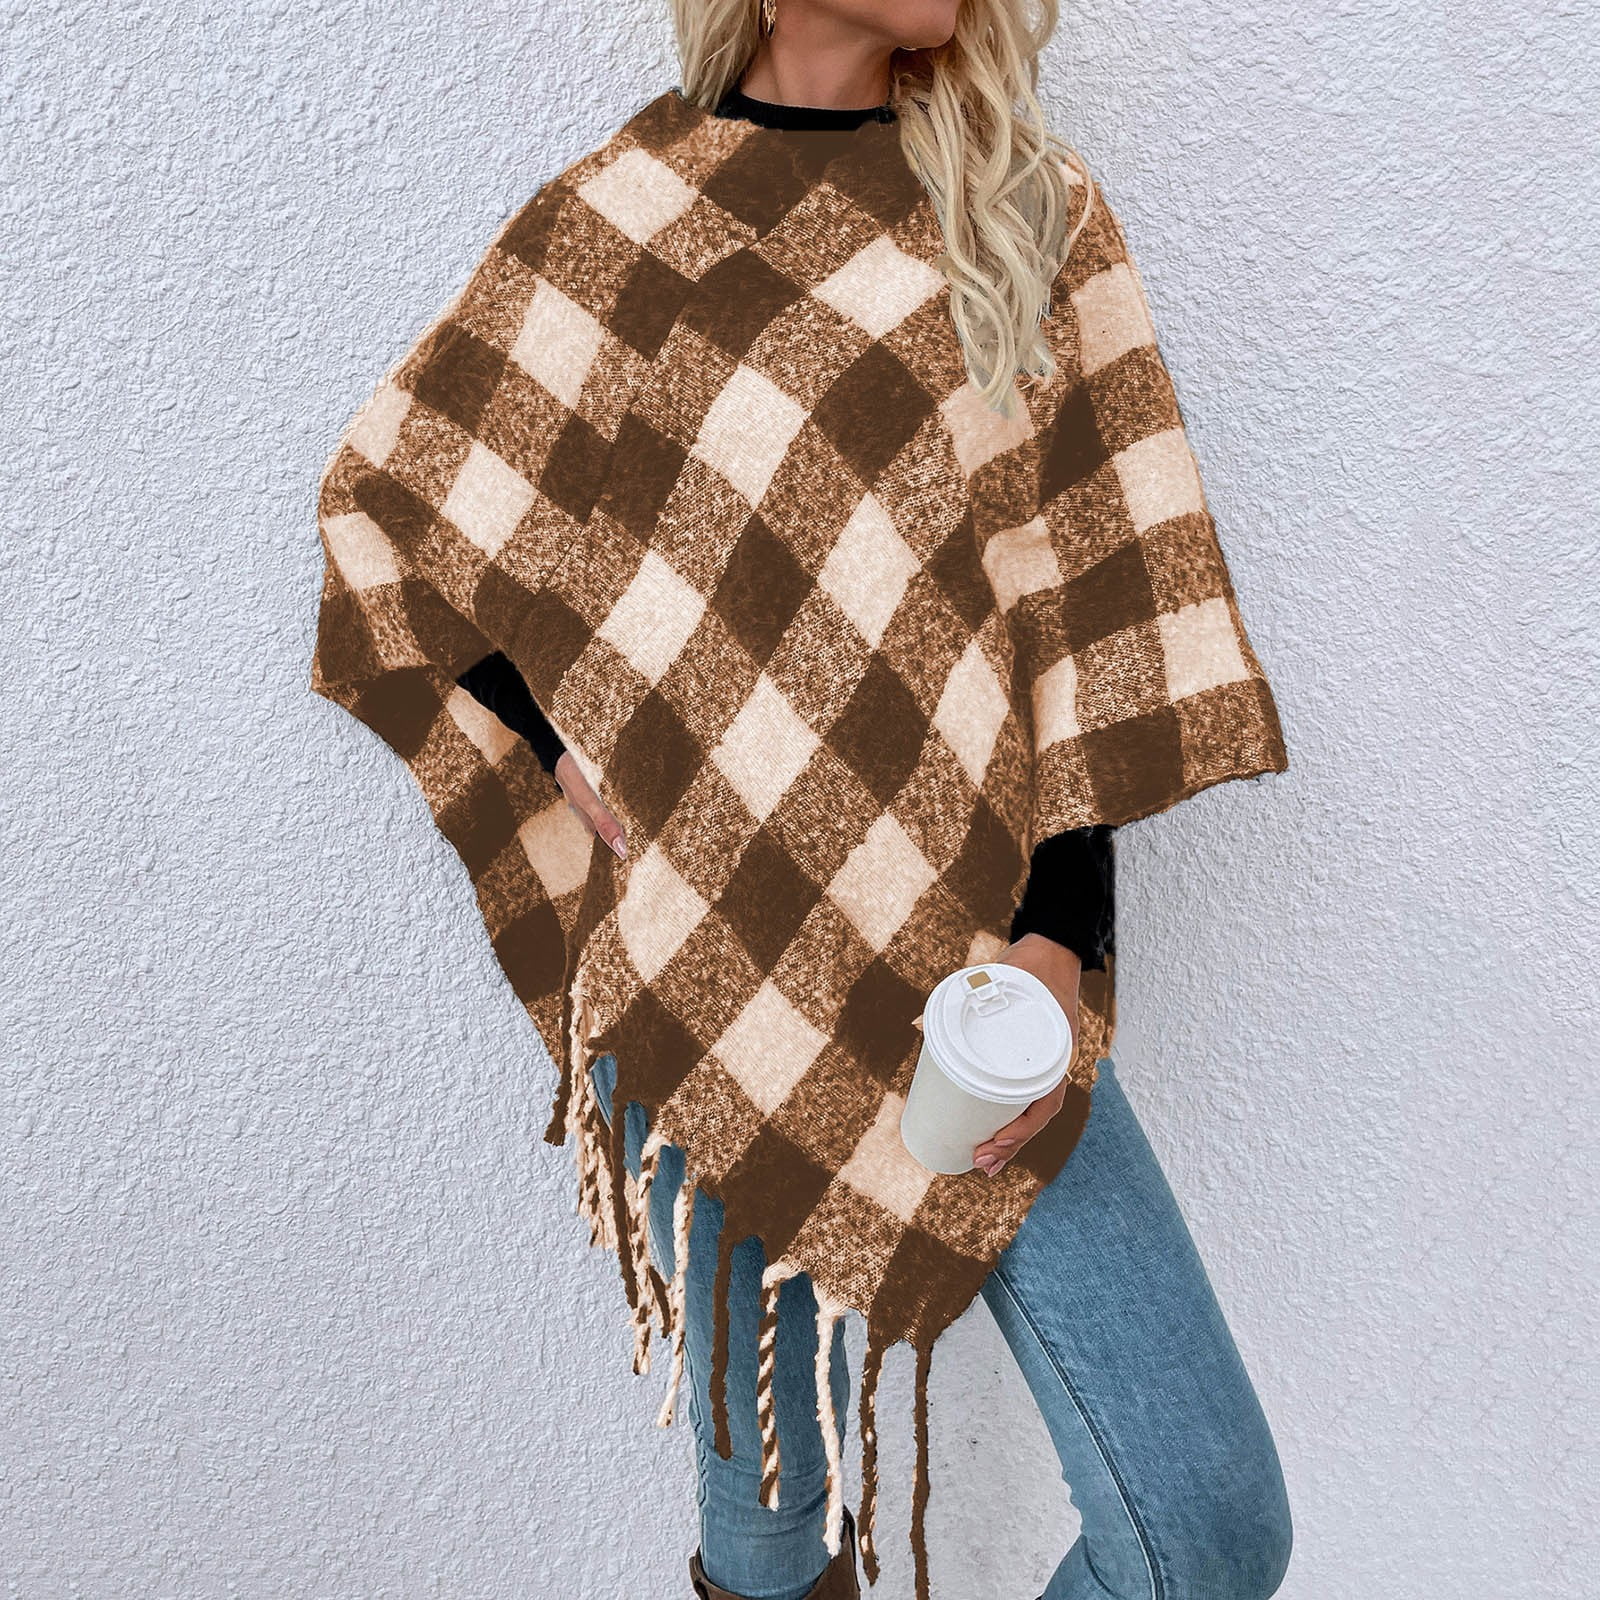 gvdentm Cardigan Sweater Open Front WoWomen Houndstooth Fringe Shawl Sweater  Cape Knit Jacket Pullover Fashion Coat